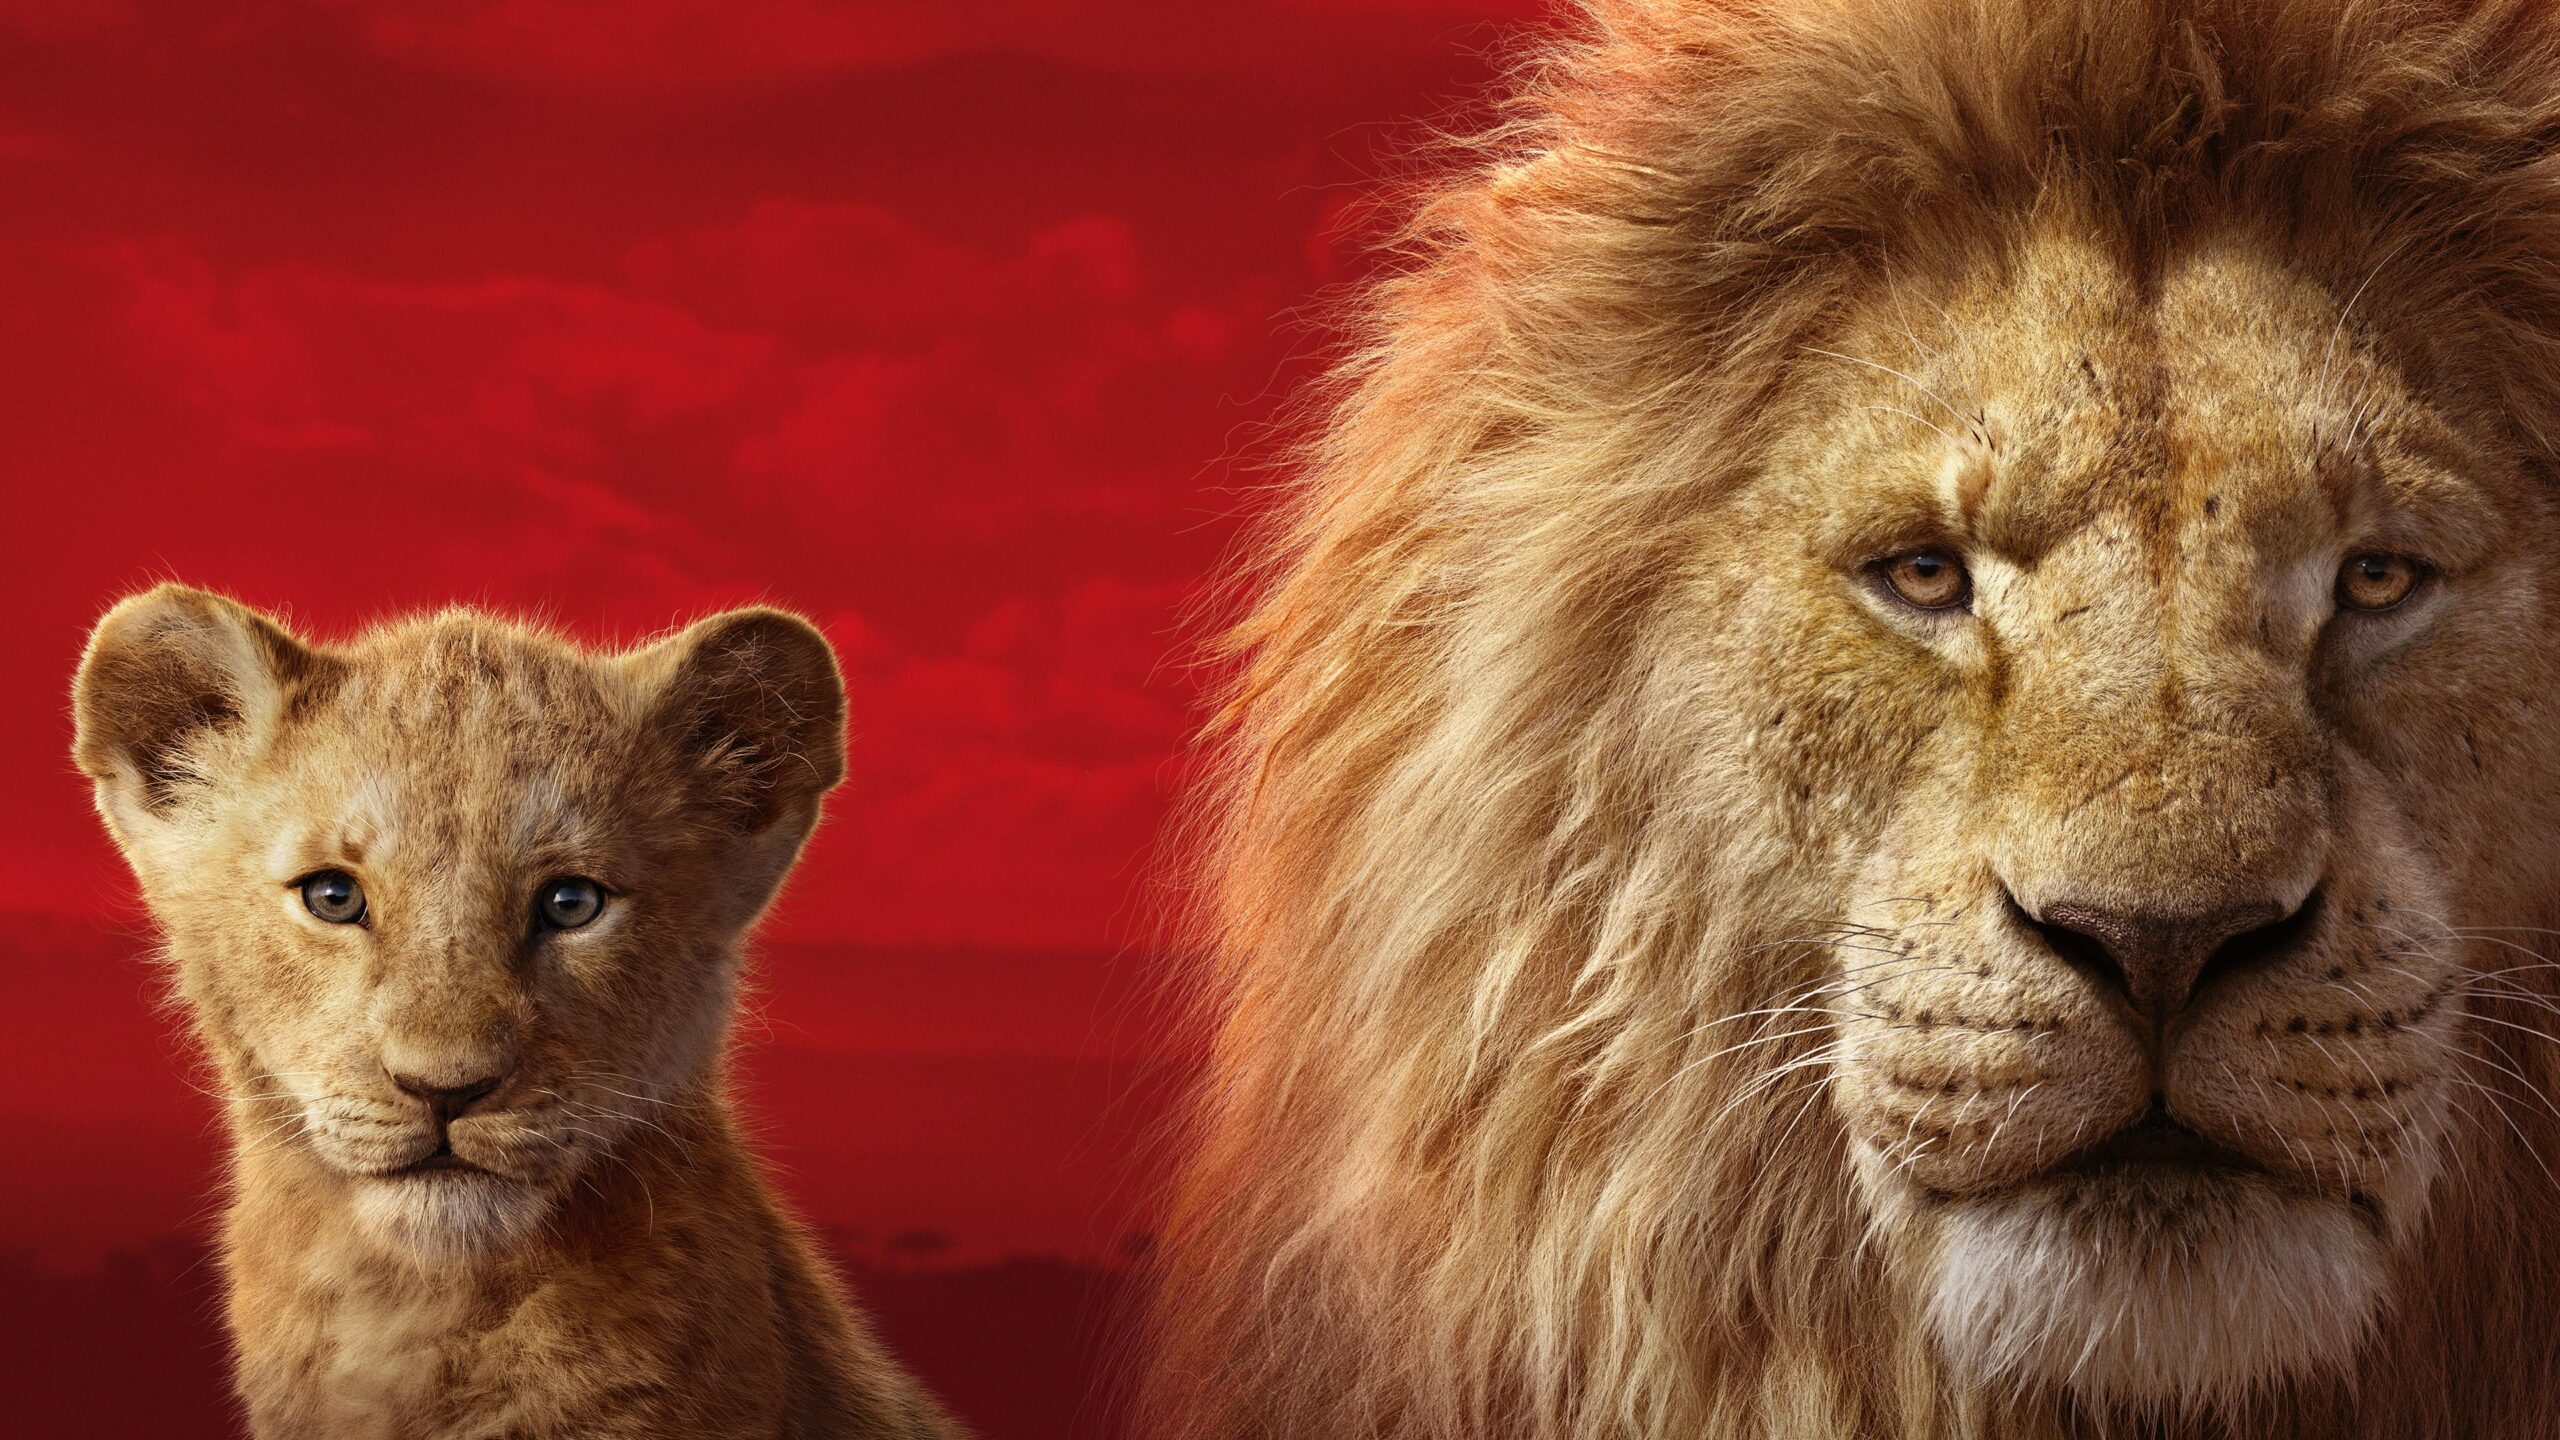 Wallpapers k The Lion King  movies wallpapers, k